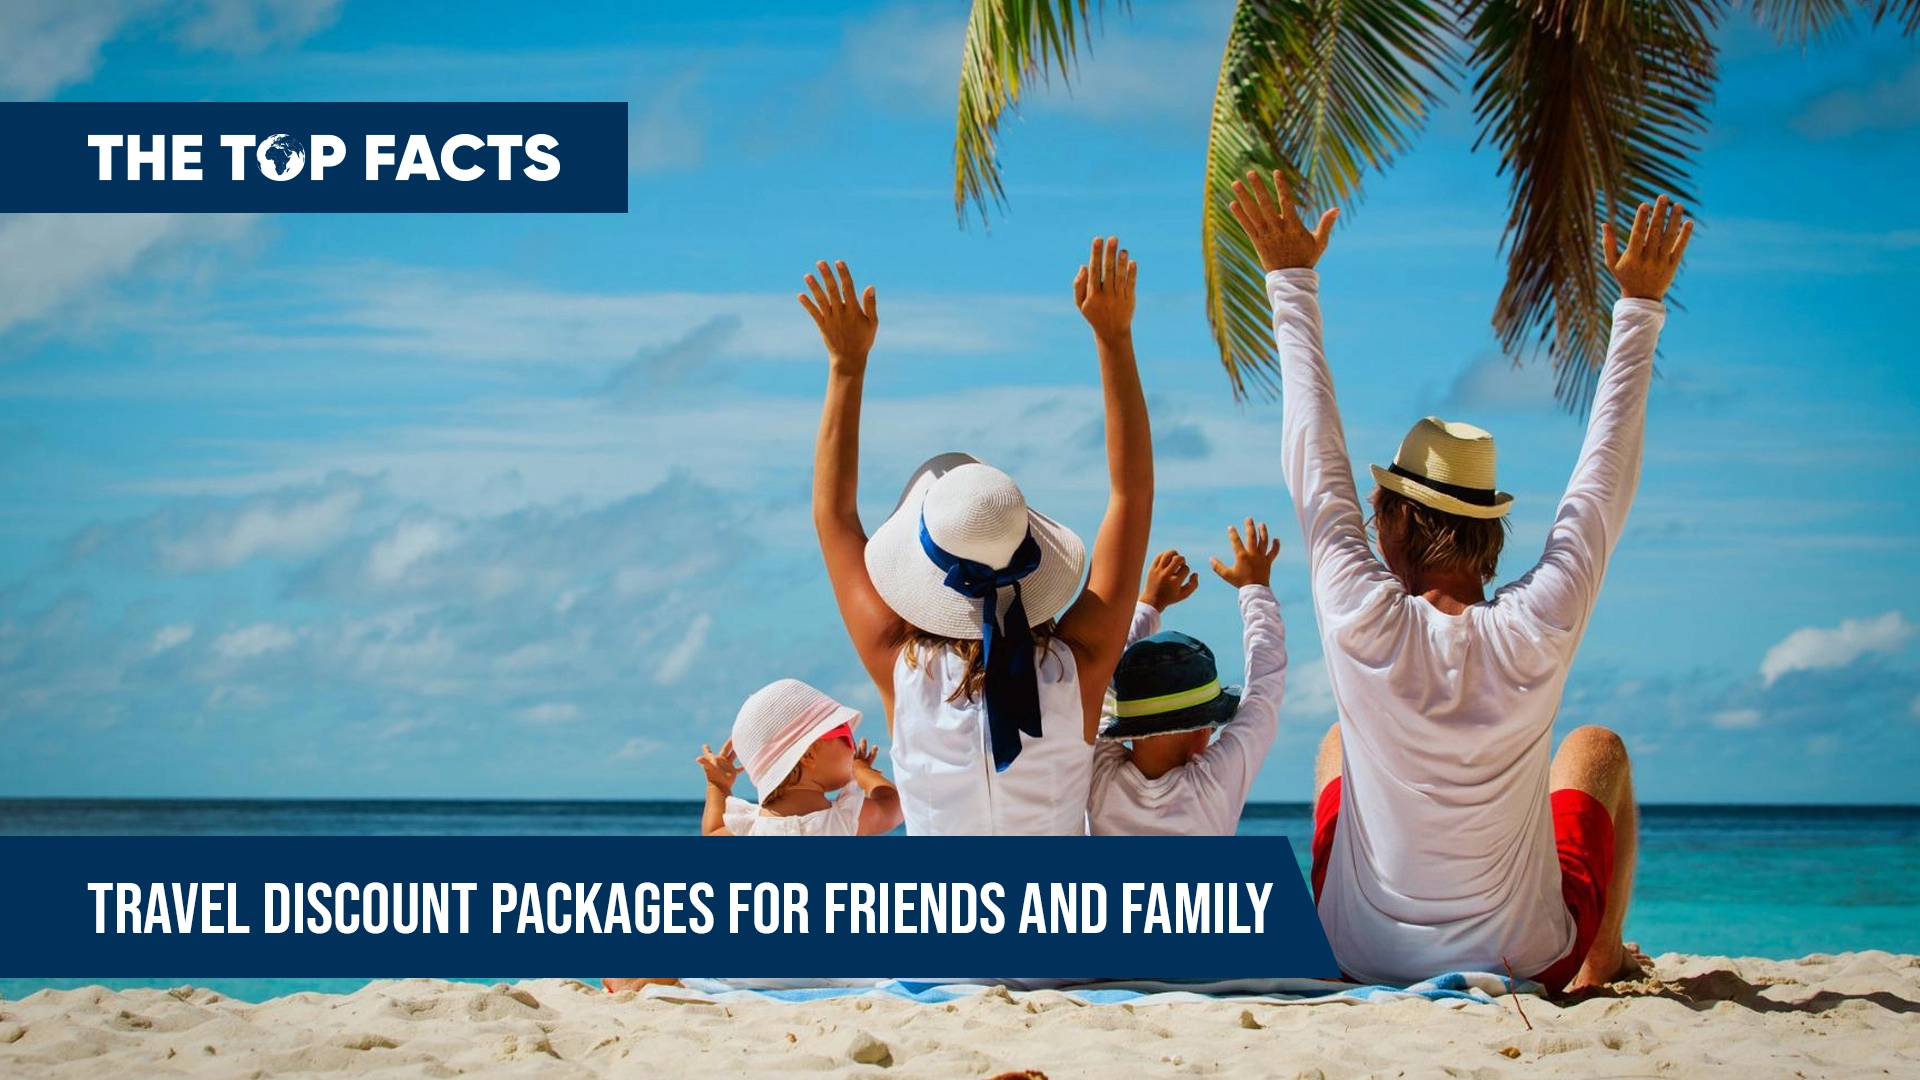 Save on vacation getaways with our special group rates for friends and family